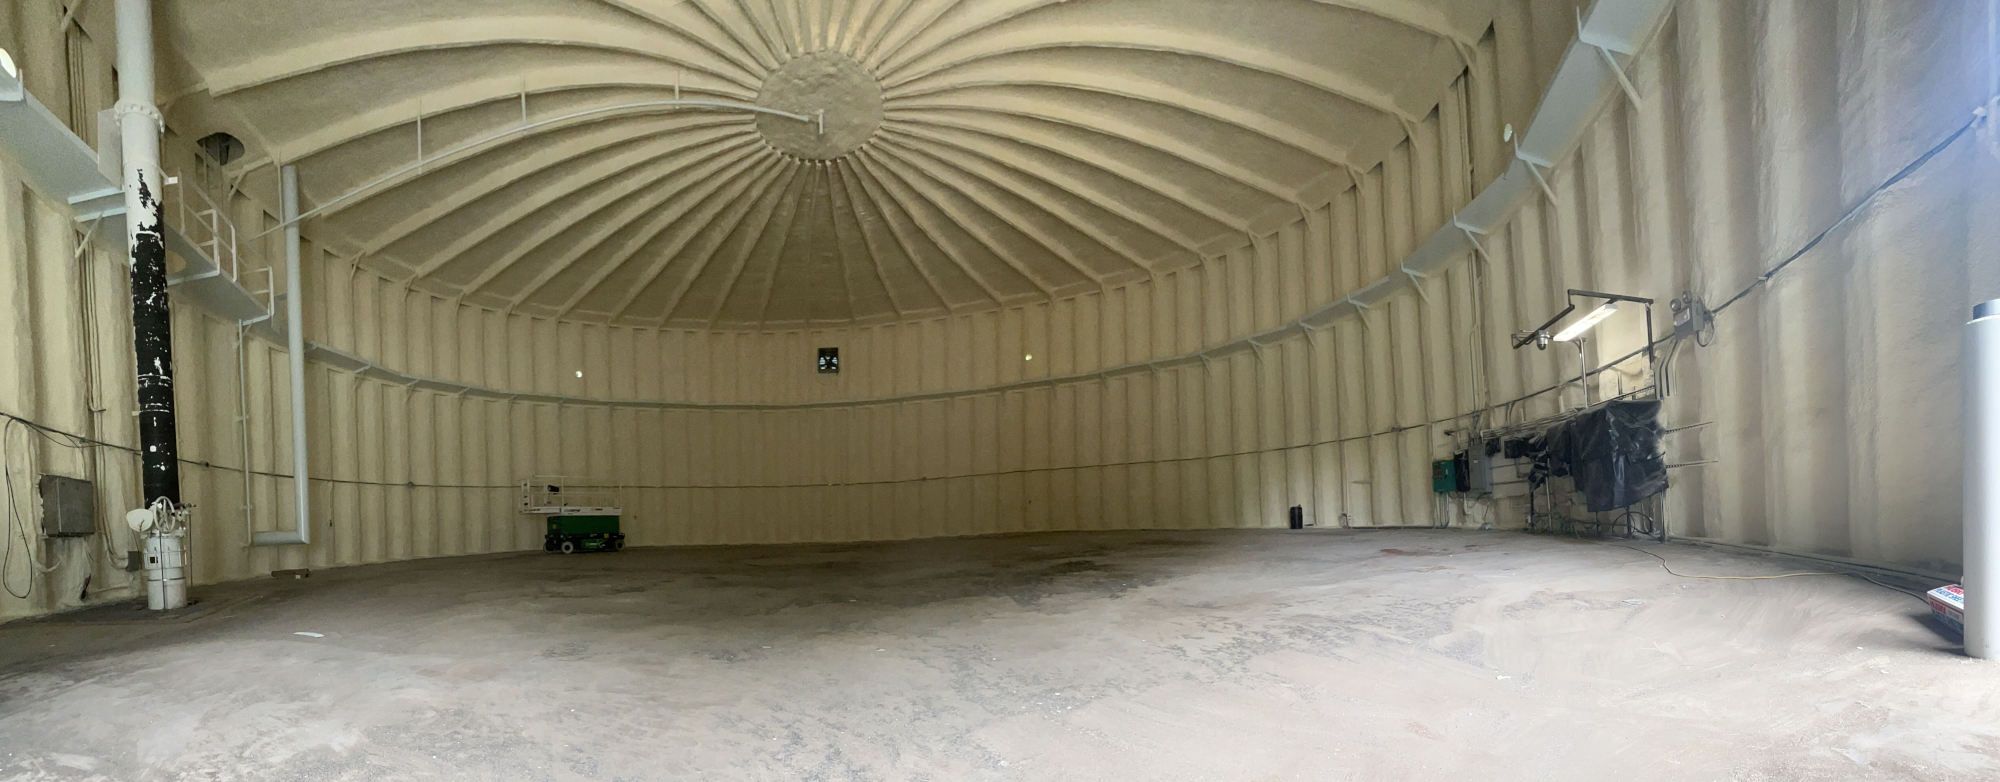 Spray Foam insulation on the interior of a large water storage tank.